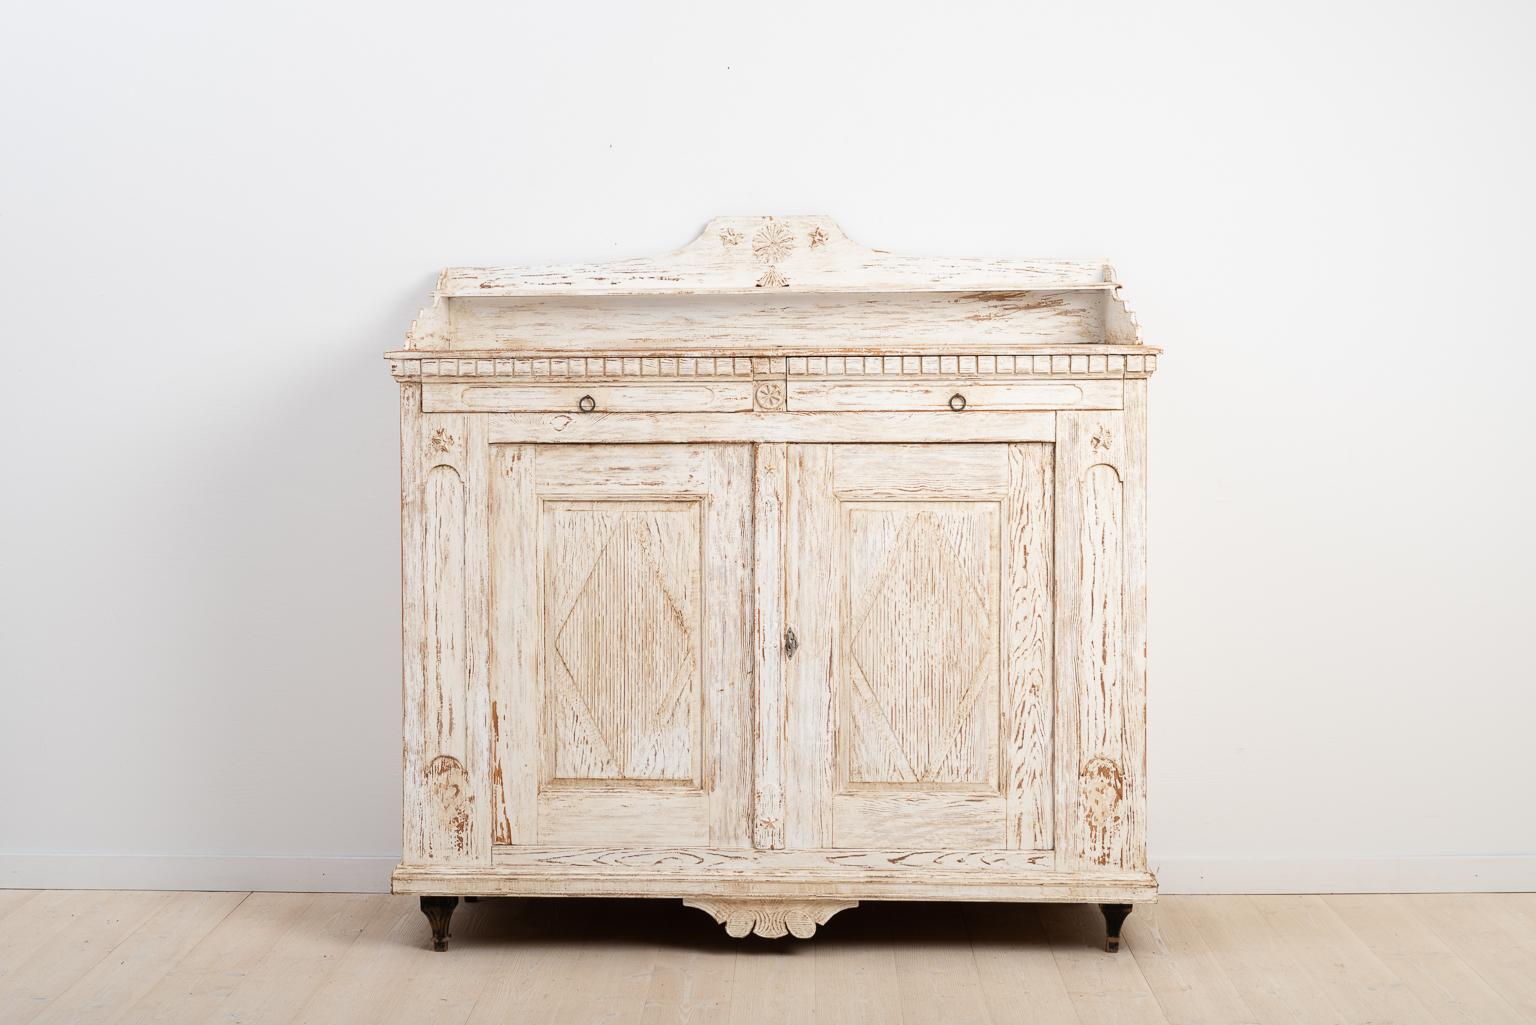 Swedish Gustavian Sideboard from the Late 18th Century with Old Historic Paint (Kiefernholz)